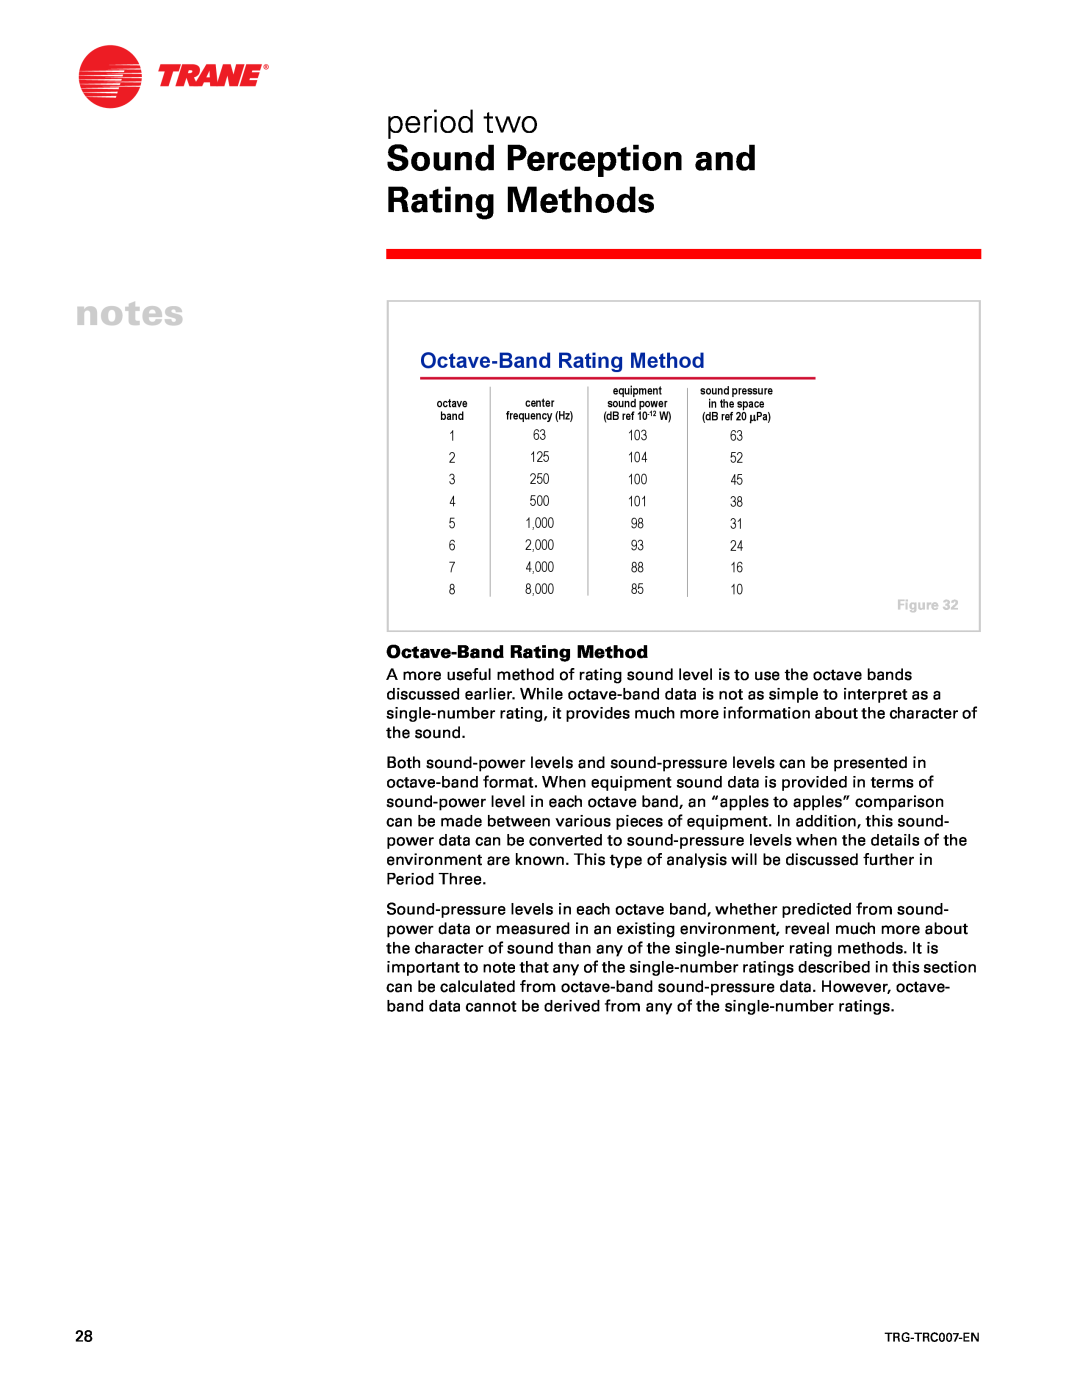 Trane TRG-TRC007-EN manual Octave-BandRating Method, Sound Perception and Rating Methods, period two 